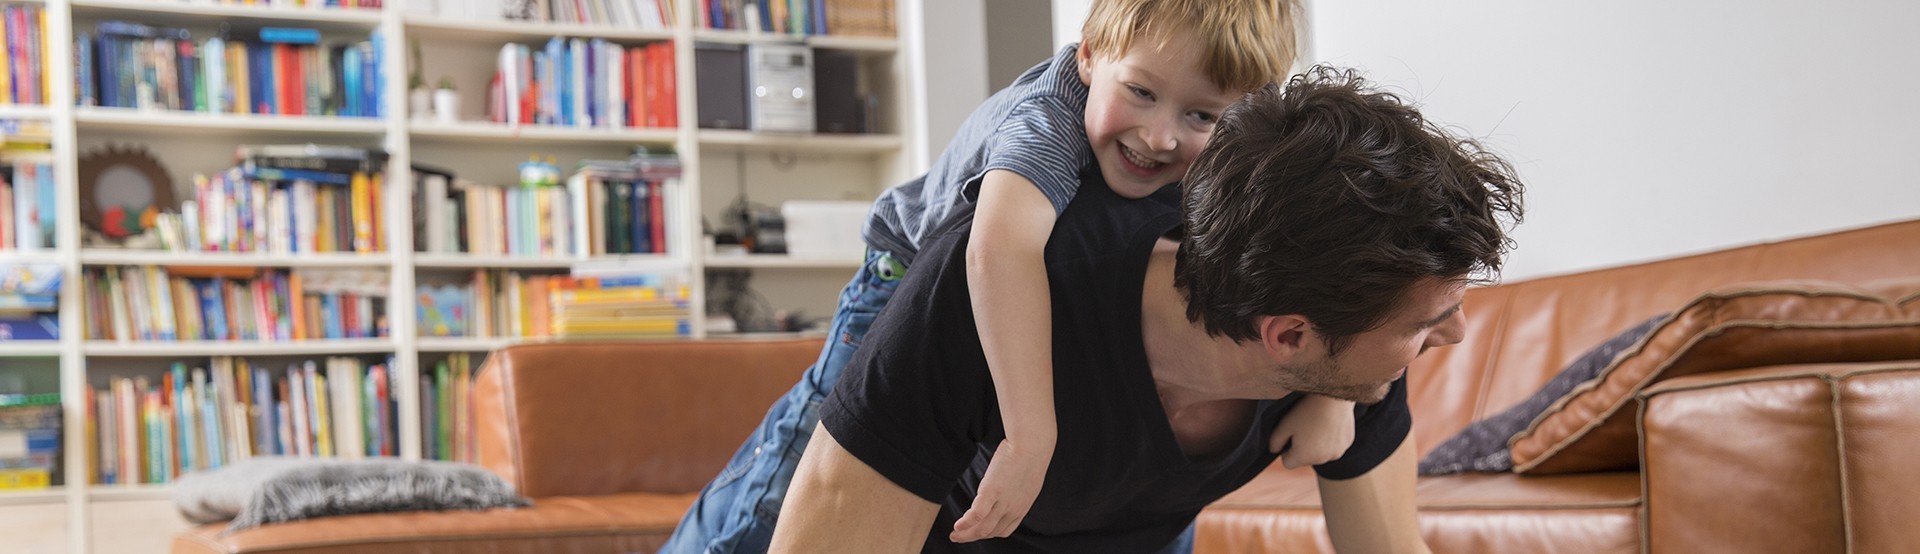 man doing push ups with his son on laughing on his back in the living room